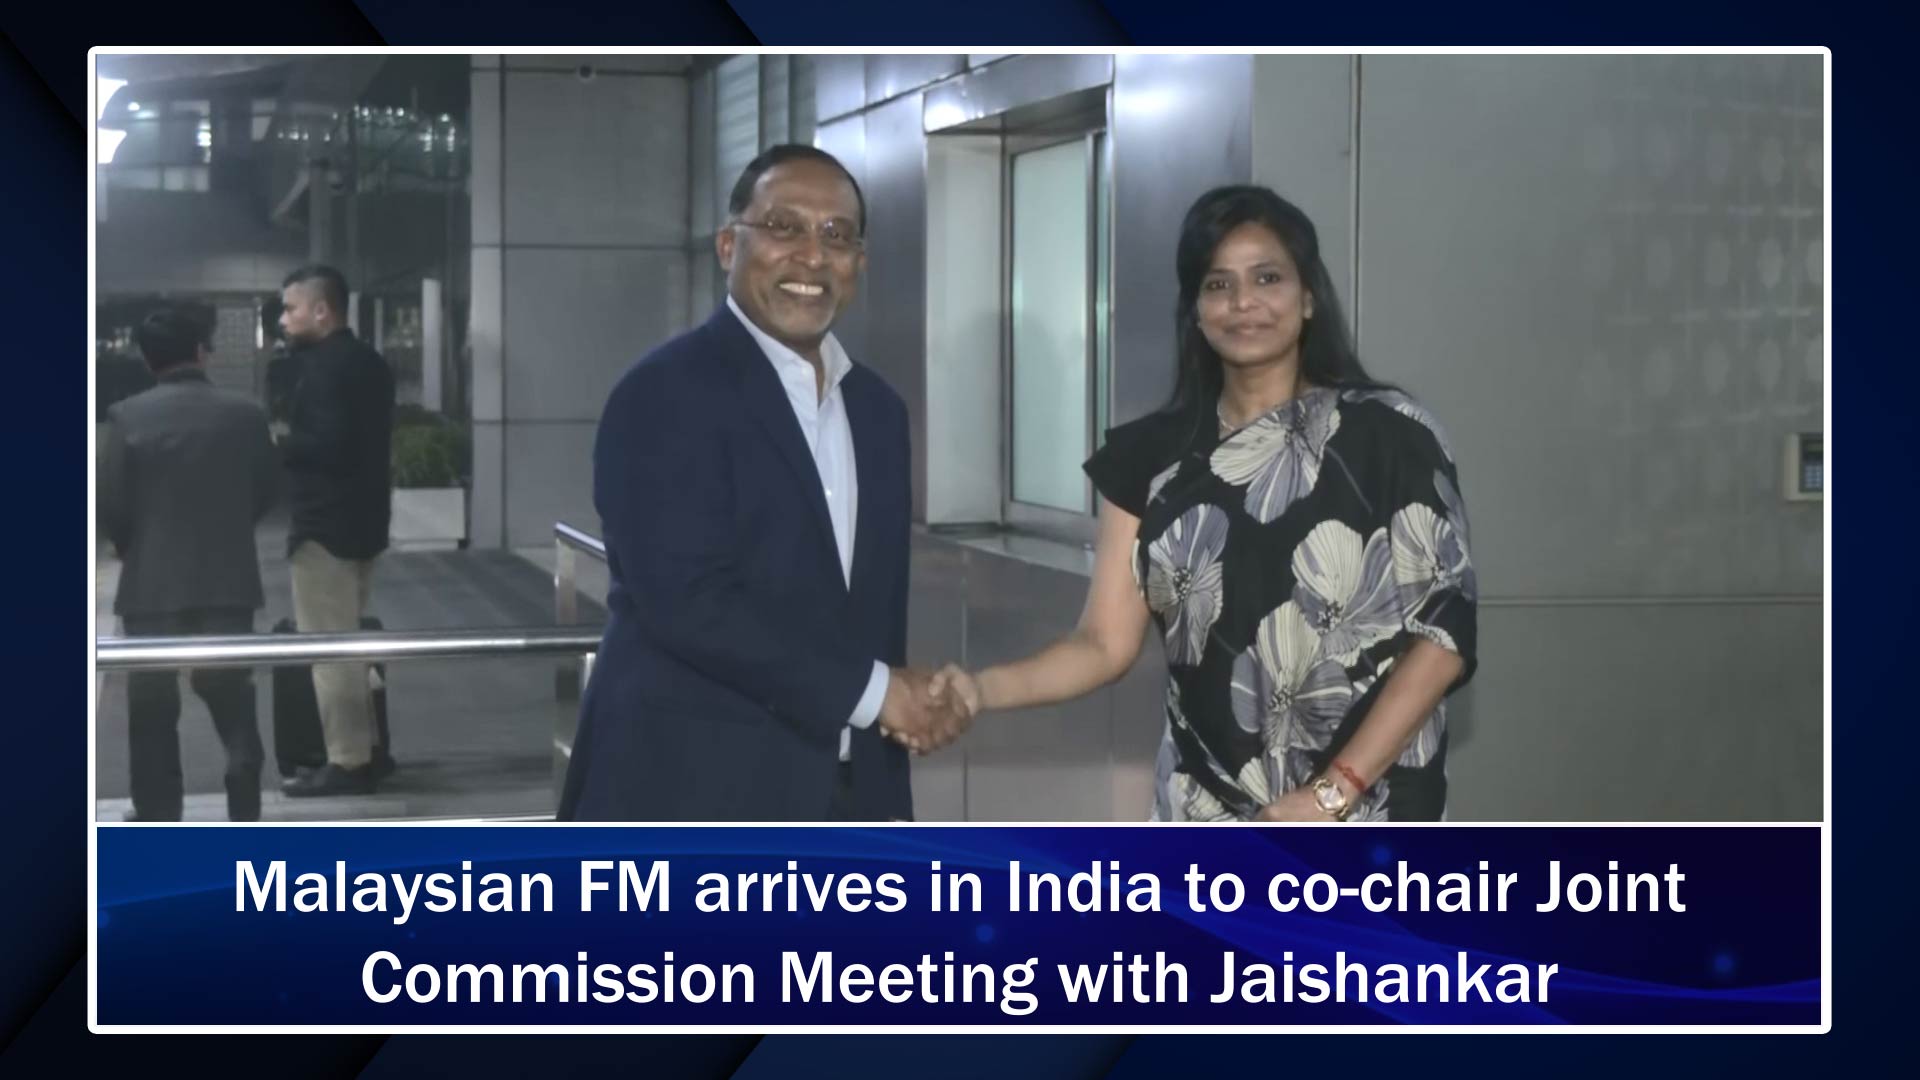 Malaysian FM arrives in India to co-chair Joint Commission Meeting with Jaishankar